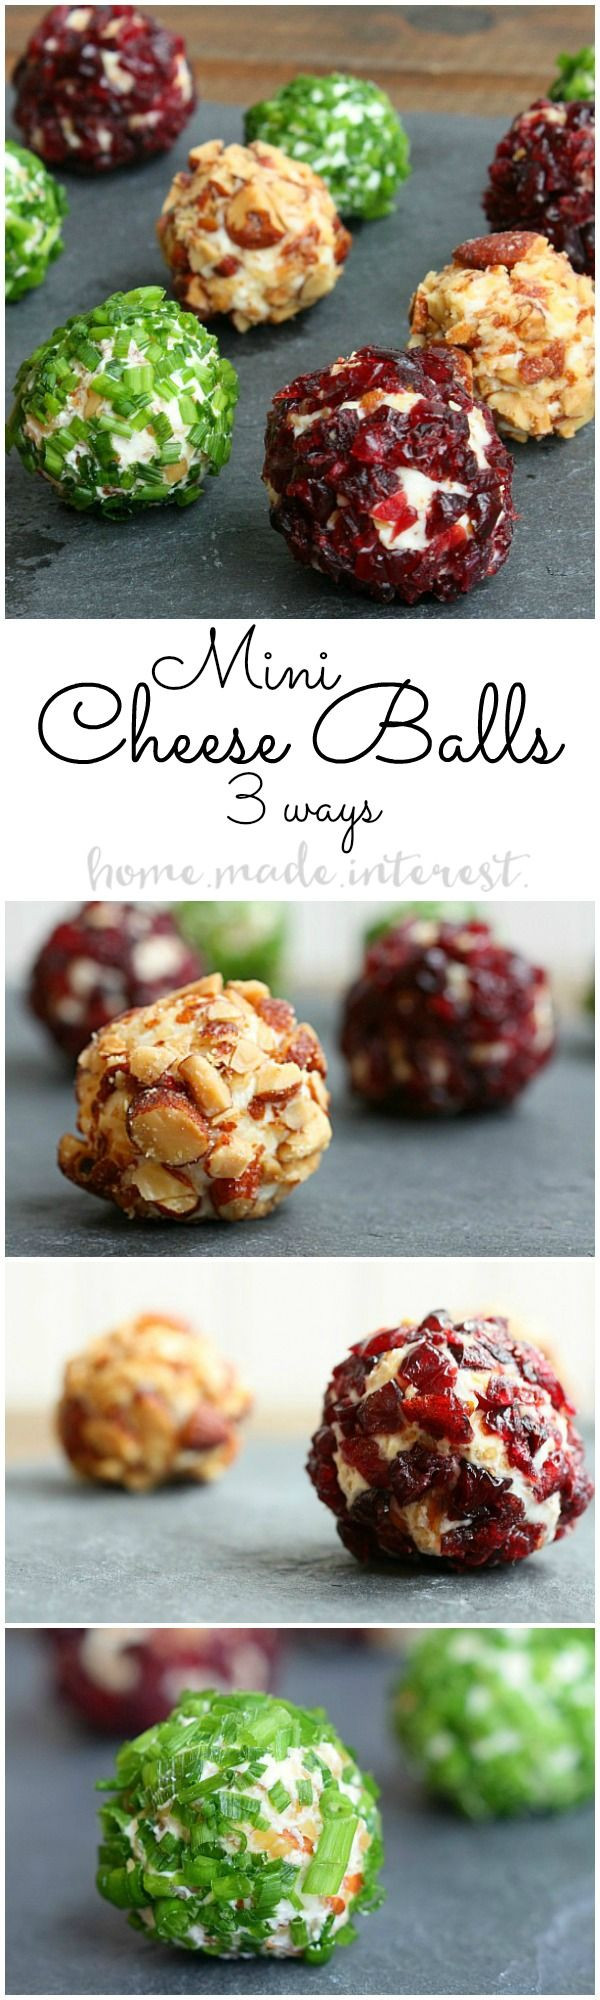 Mini Cheese Ball Appetizers
 These mini cheese balls are an easy appetizer recipe that